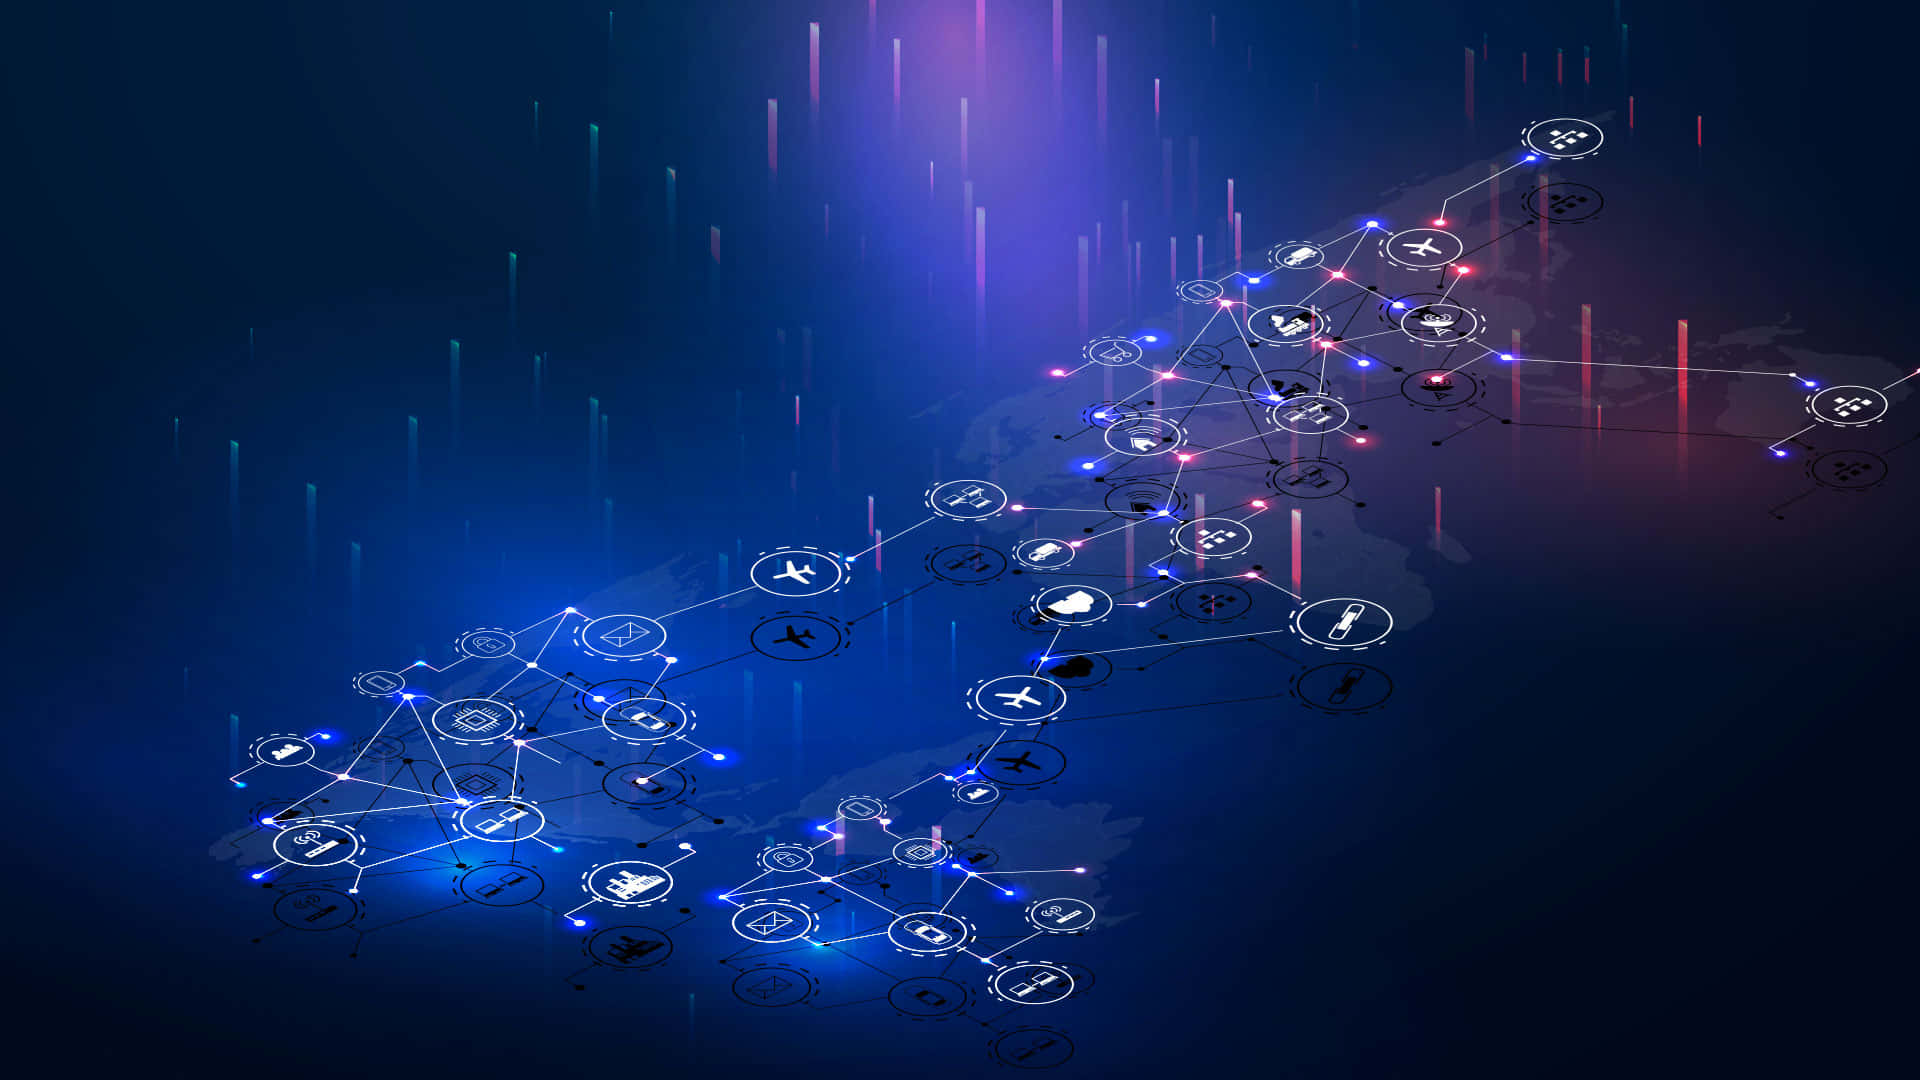 Abstract Network Connectivity Concept Background